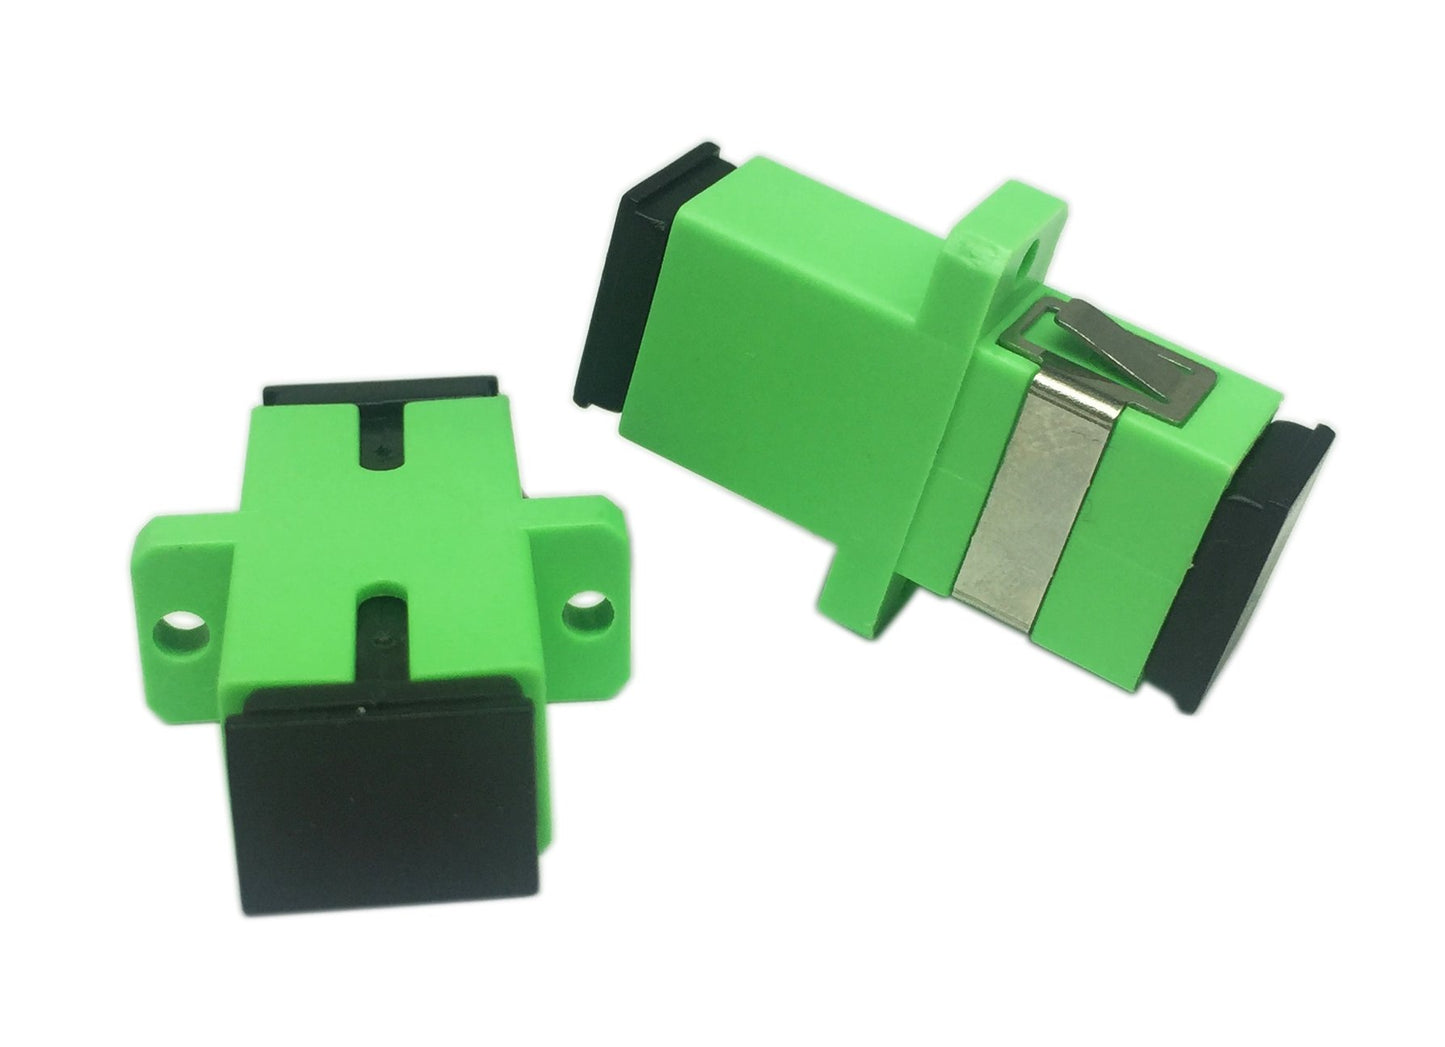 SC Singlemode Fiber Optic Adapter SC Female to SC Female APC Simplex Coupler Network Internet Connector Adapter with Mount Panel (Green 5-Pack)